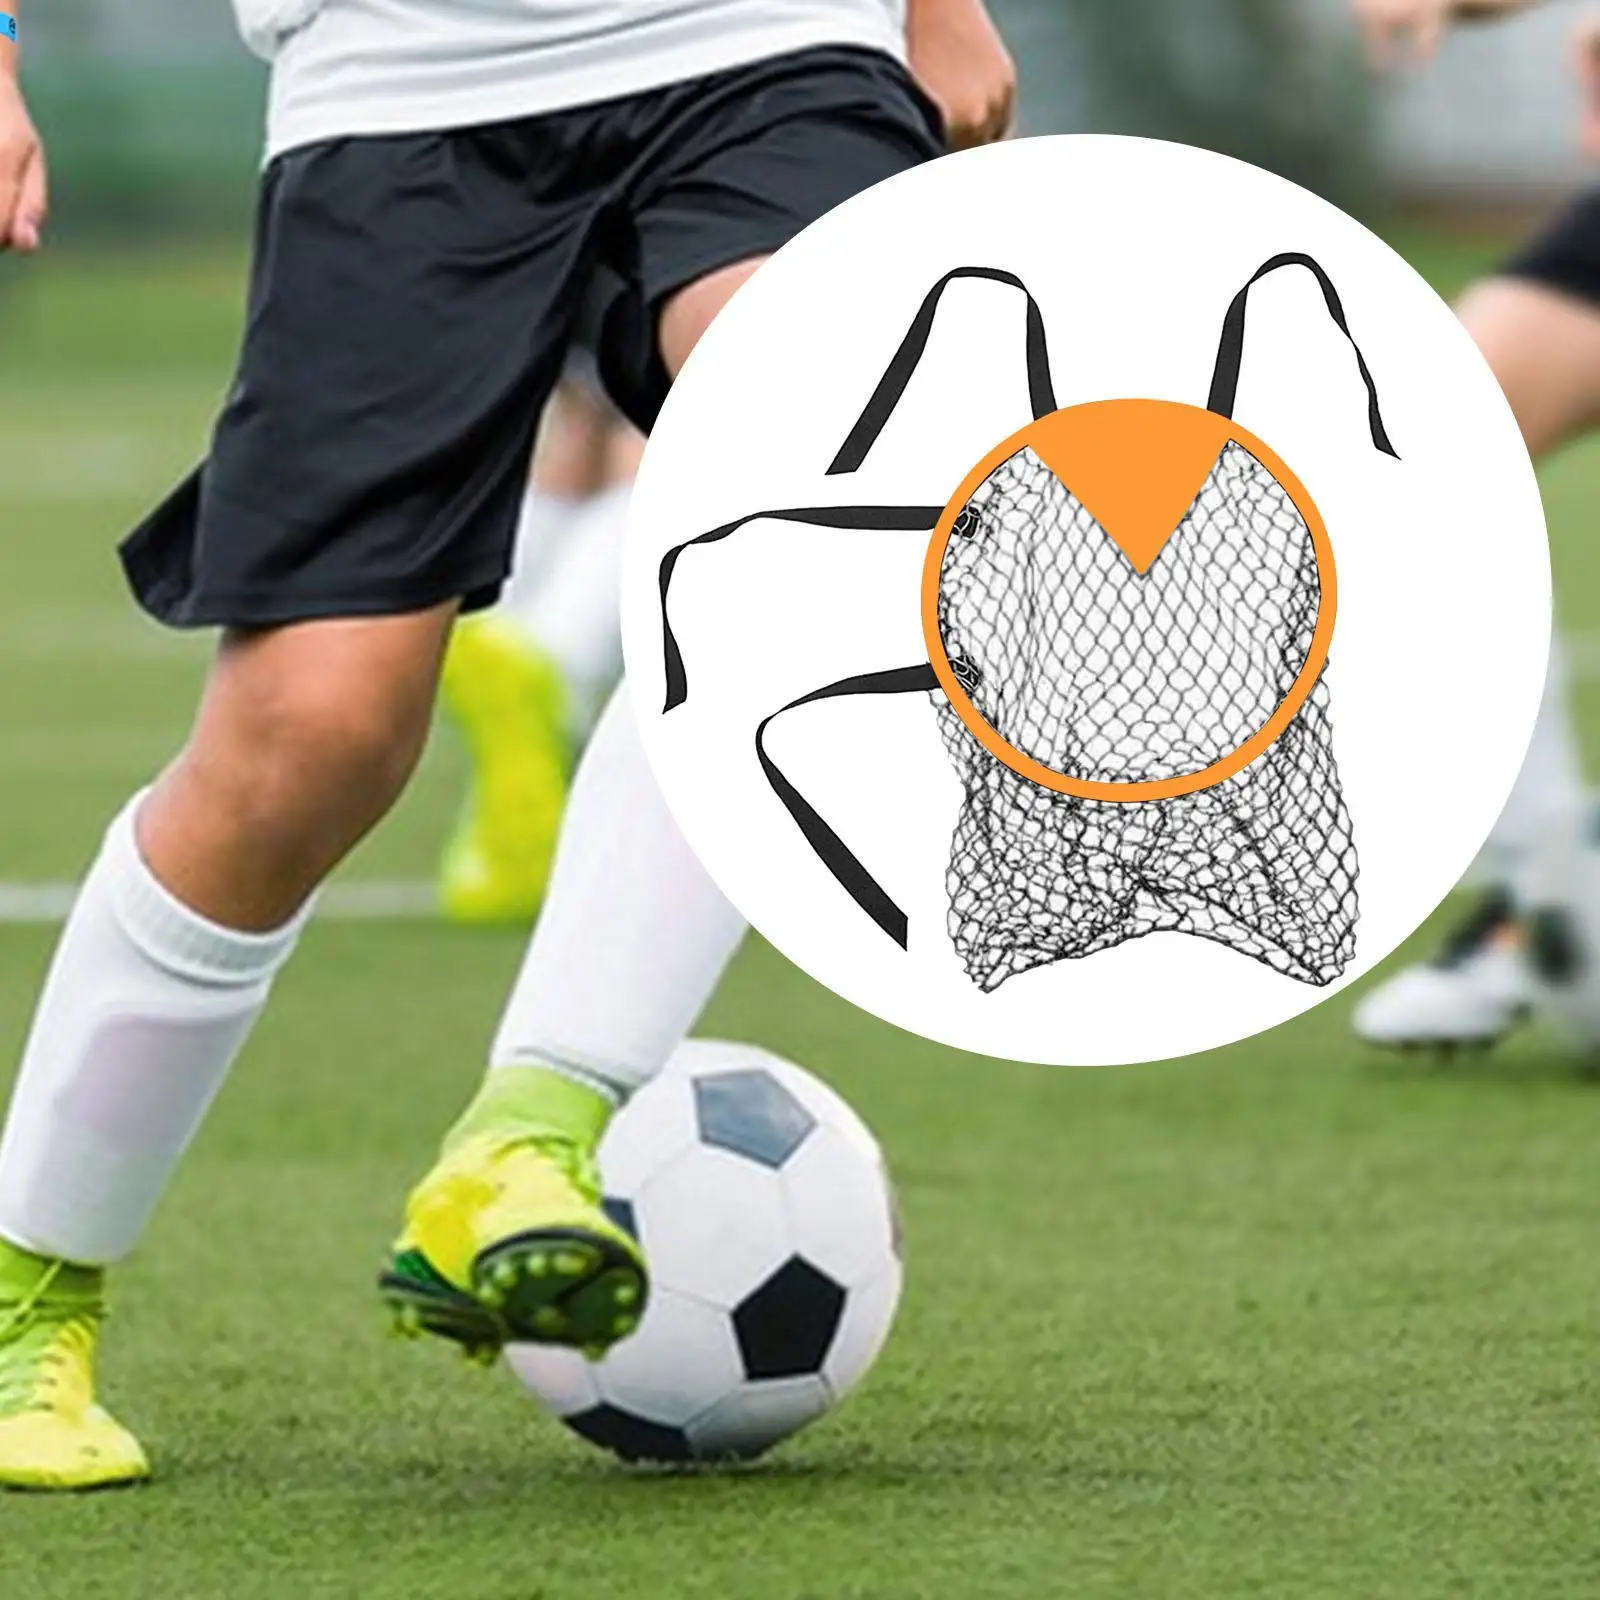 

Football Training Net Easy to Attach and Detach Dia.45cm Adjustable Straps Soccer Goal Target Net for Sports Field Outdoor